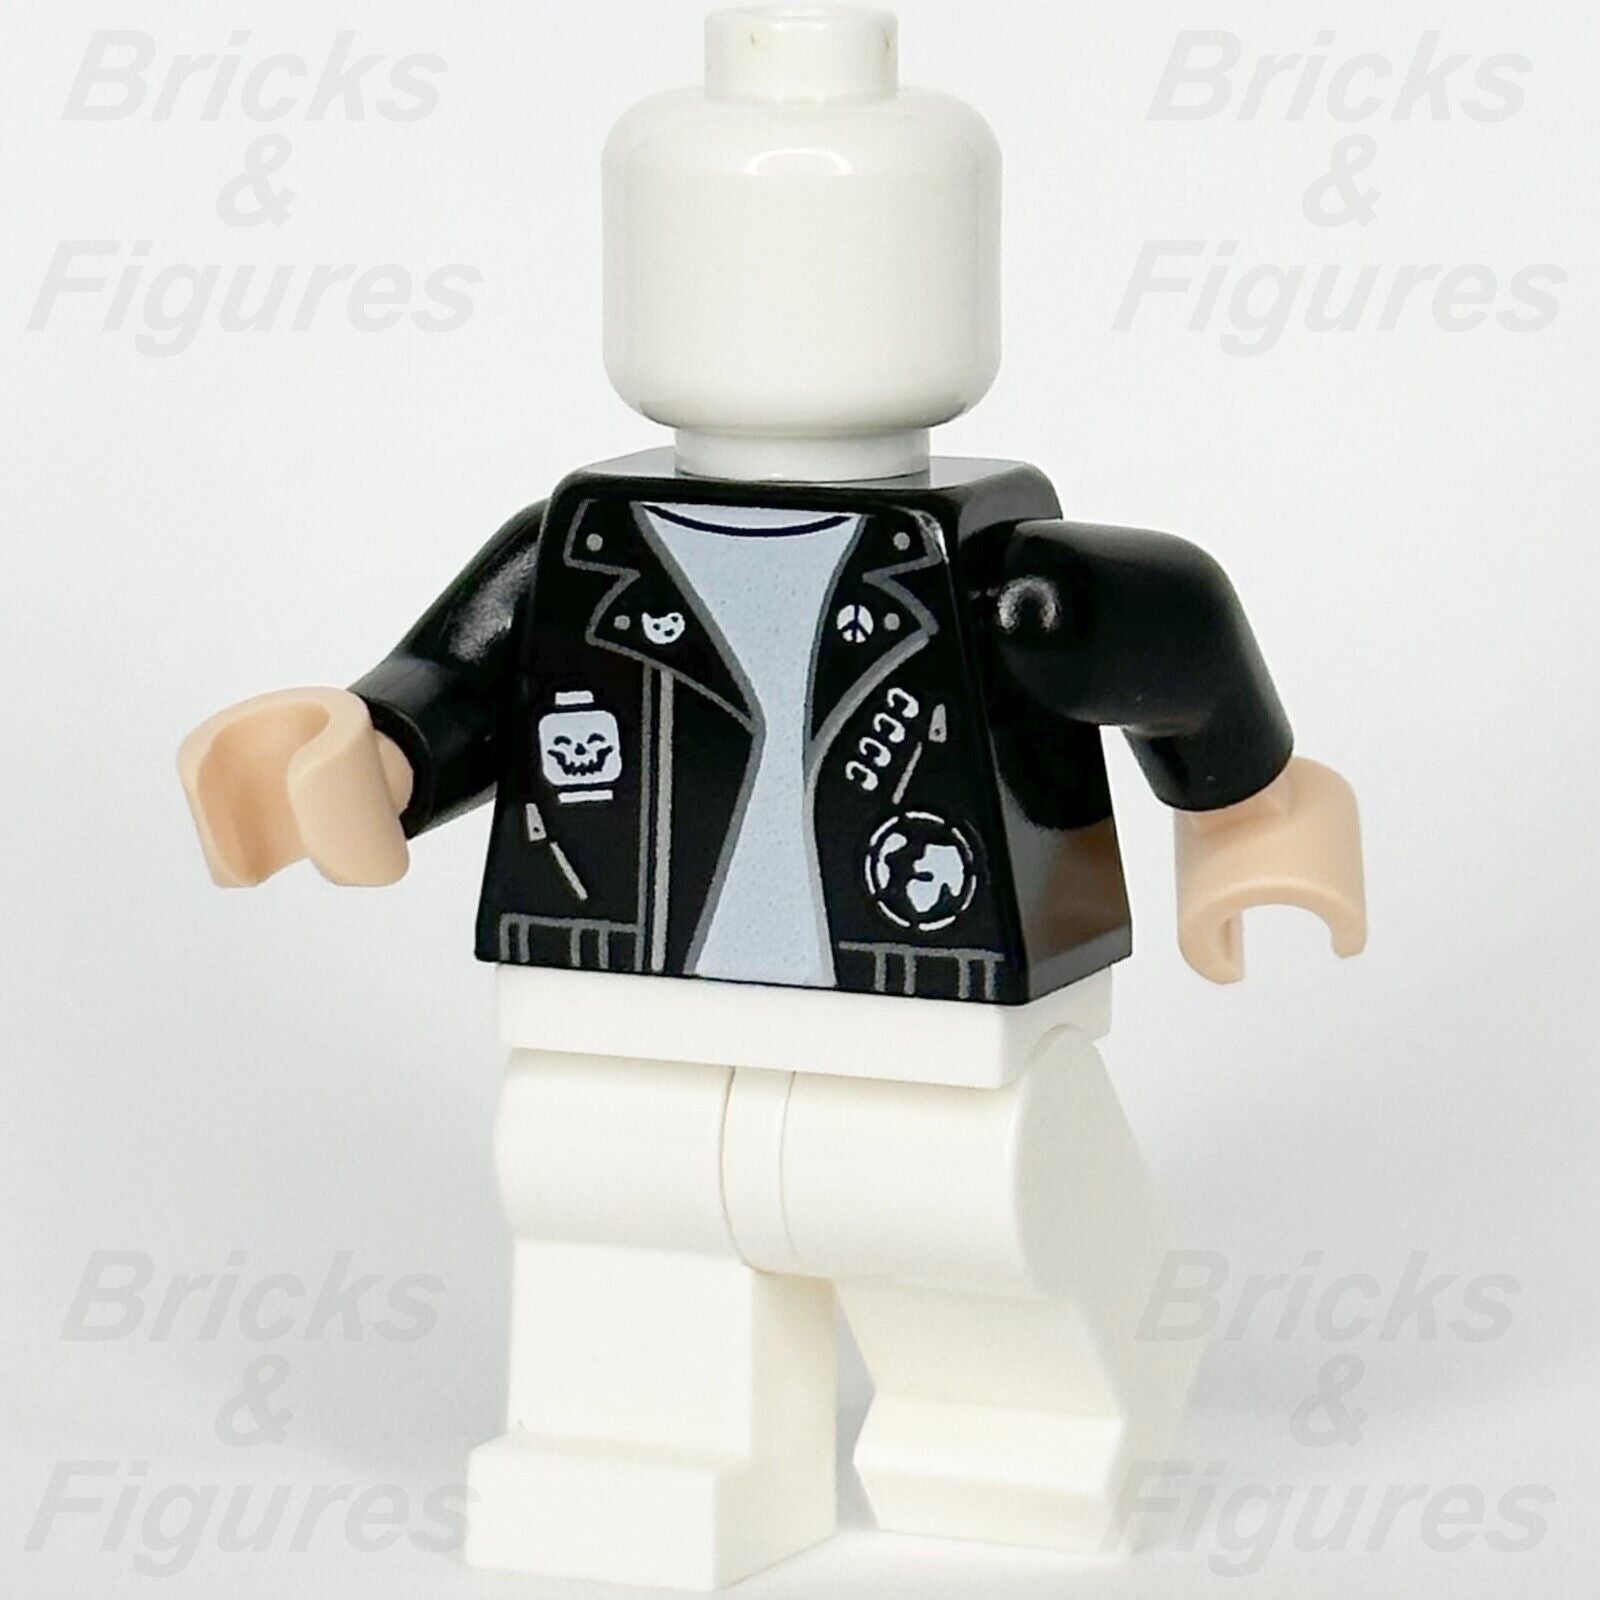 LEGO Queer Eye Body Torso Minifigure Part 'Rebuild the World' Leather Jacket 4